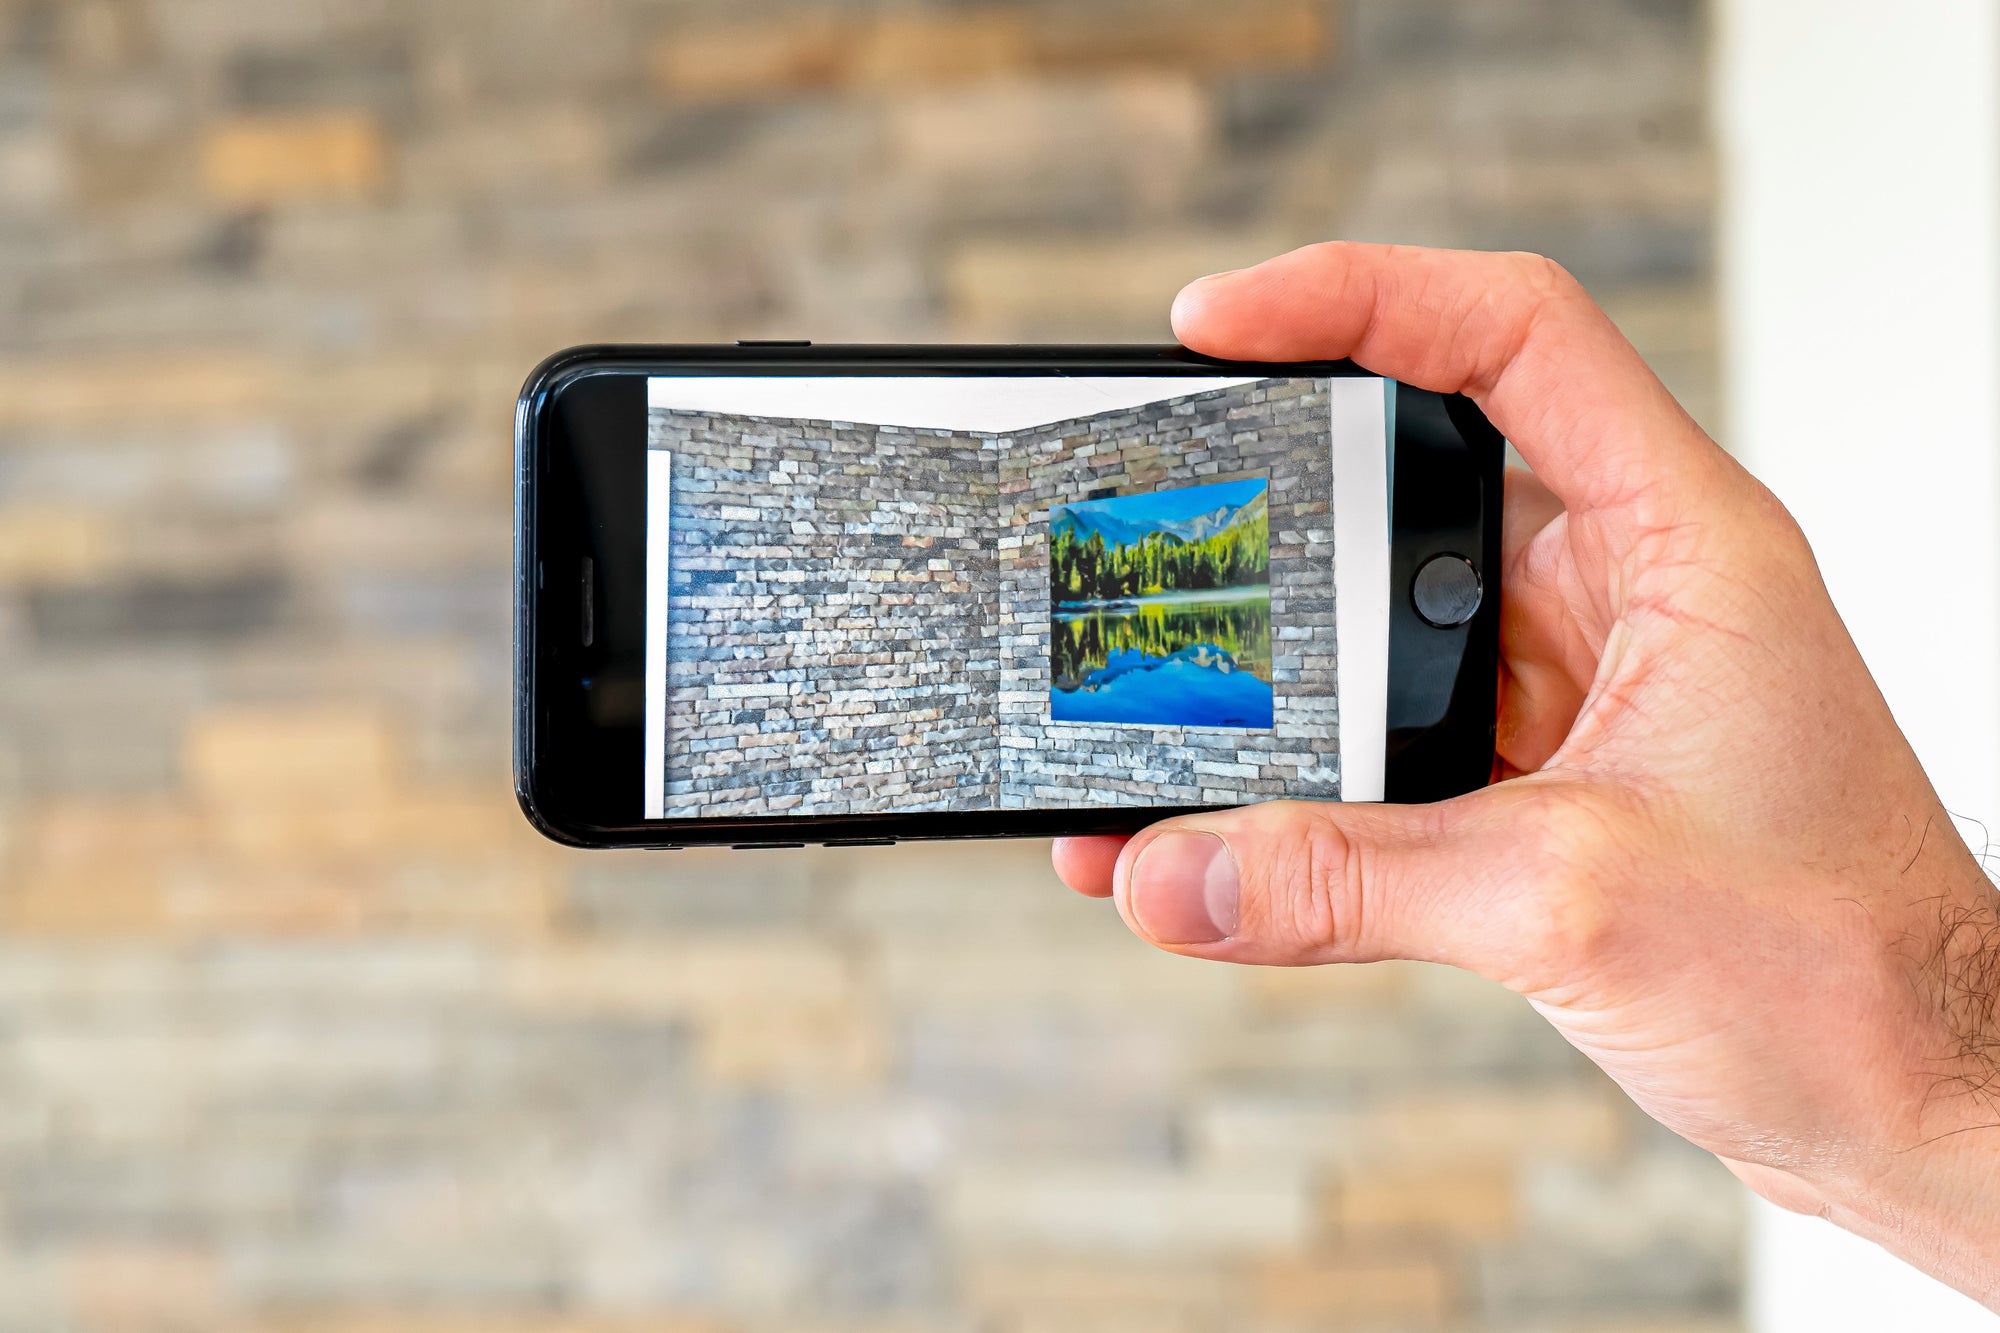 View Artwork in Augmented Reality on Your Wall!